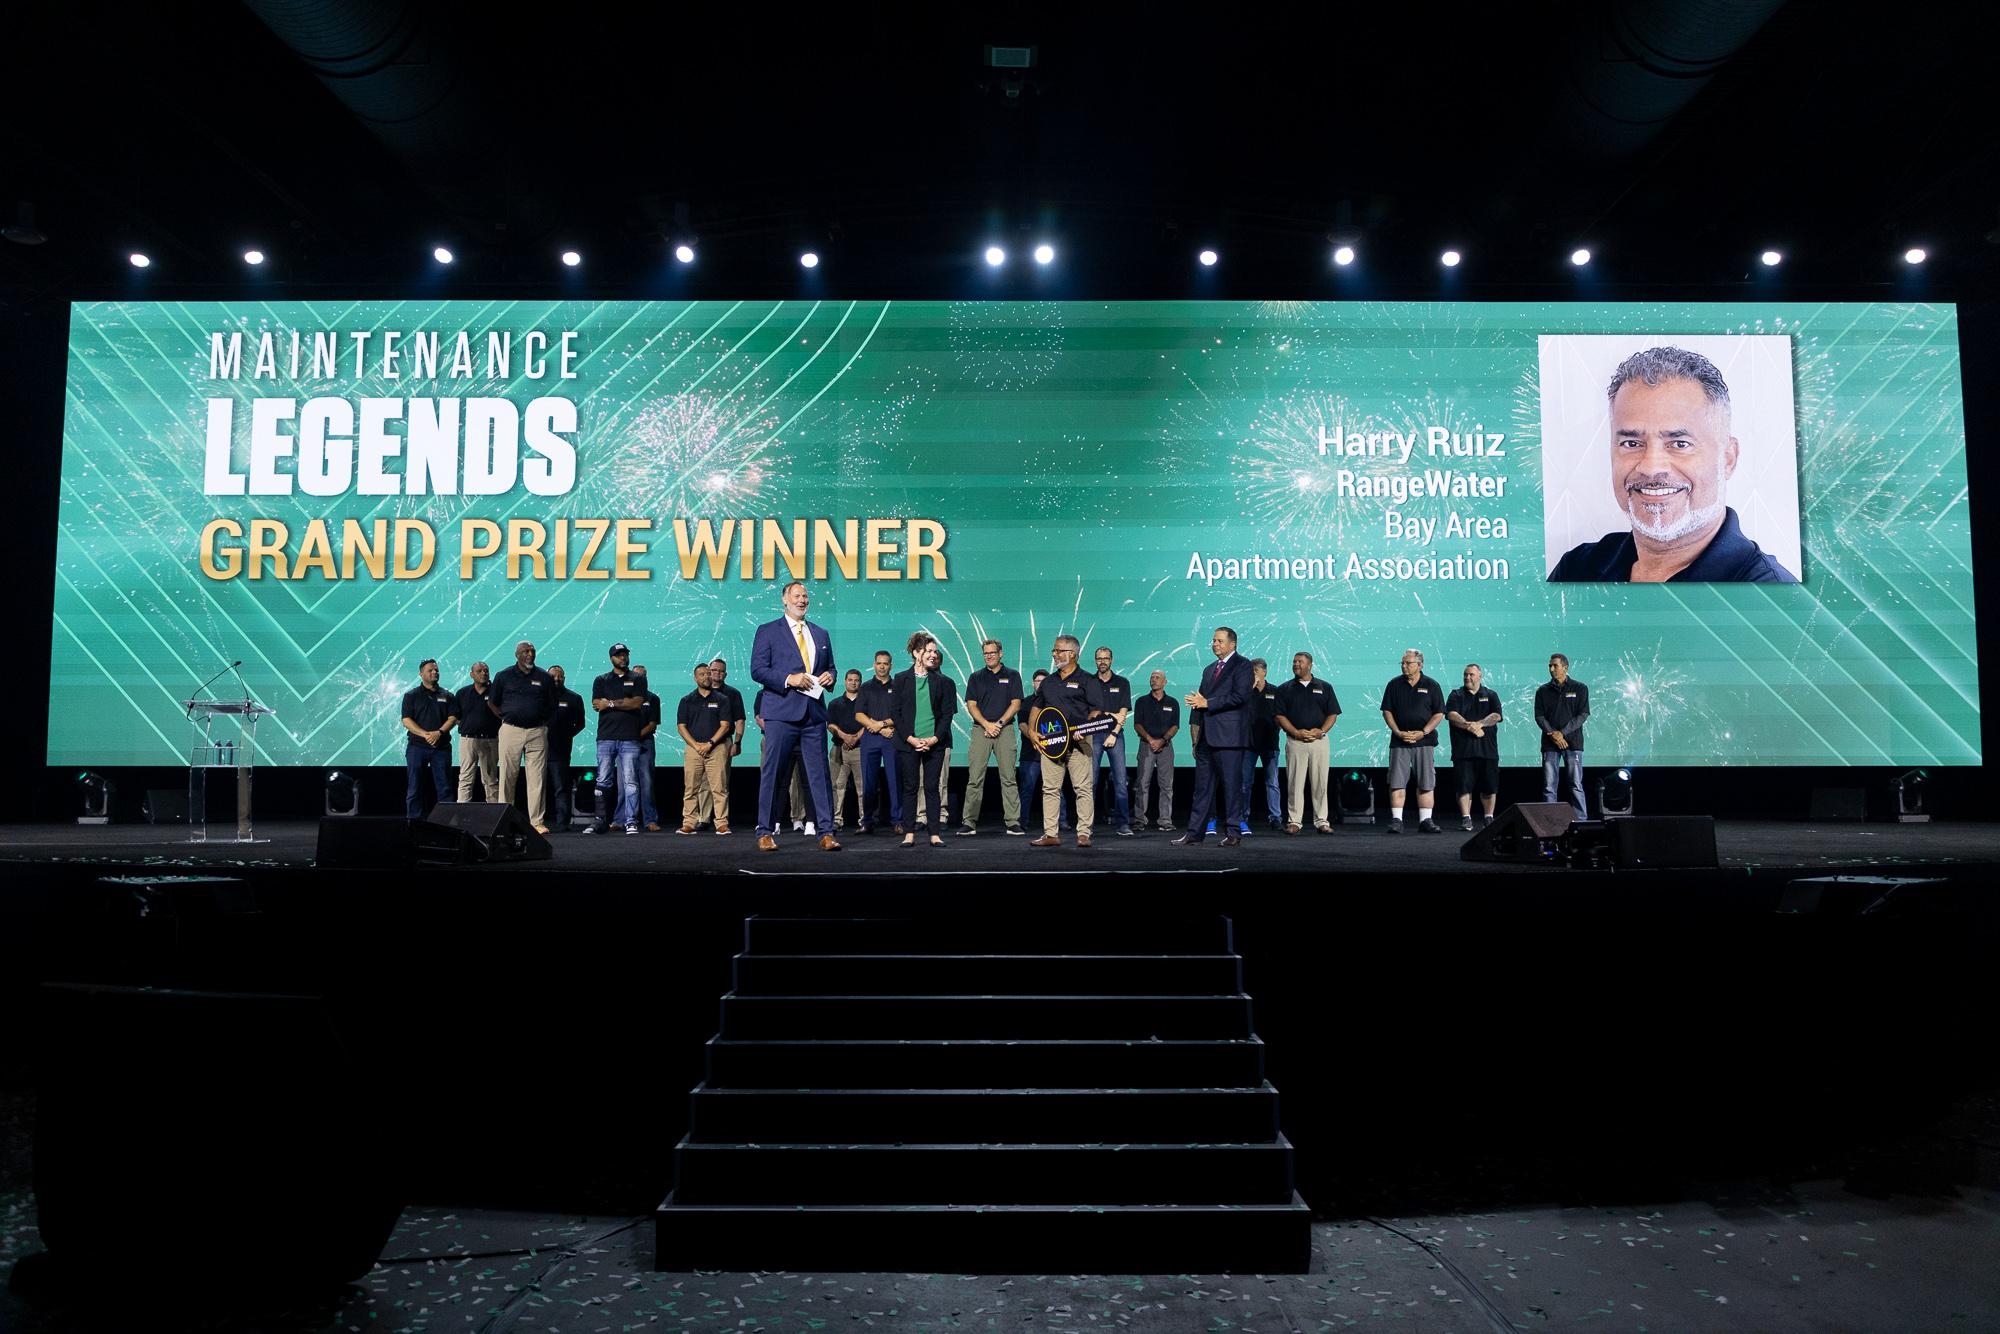 Congratulations to the Grand Prize winner of the inaugural Maintenance Legends, with the Bay Area Apartment Association, Harry Ruiz of RangeWater.